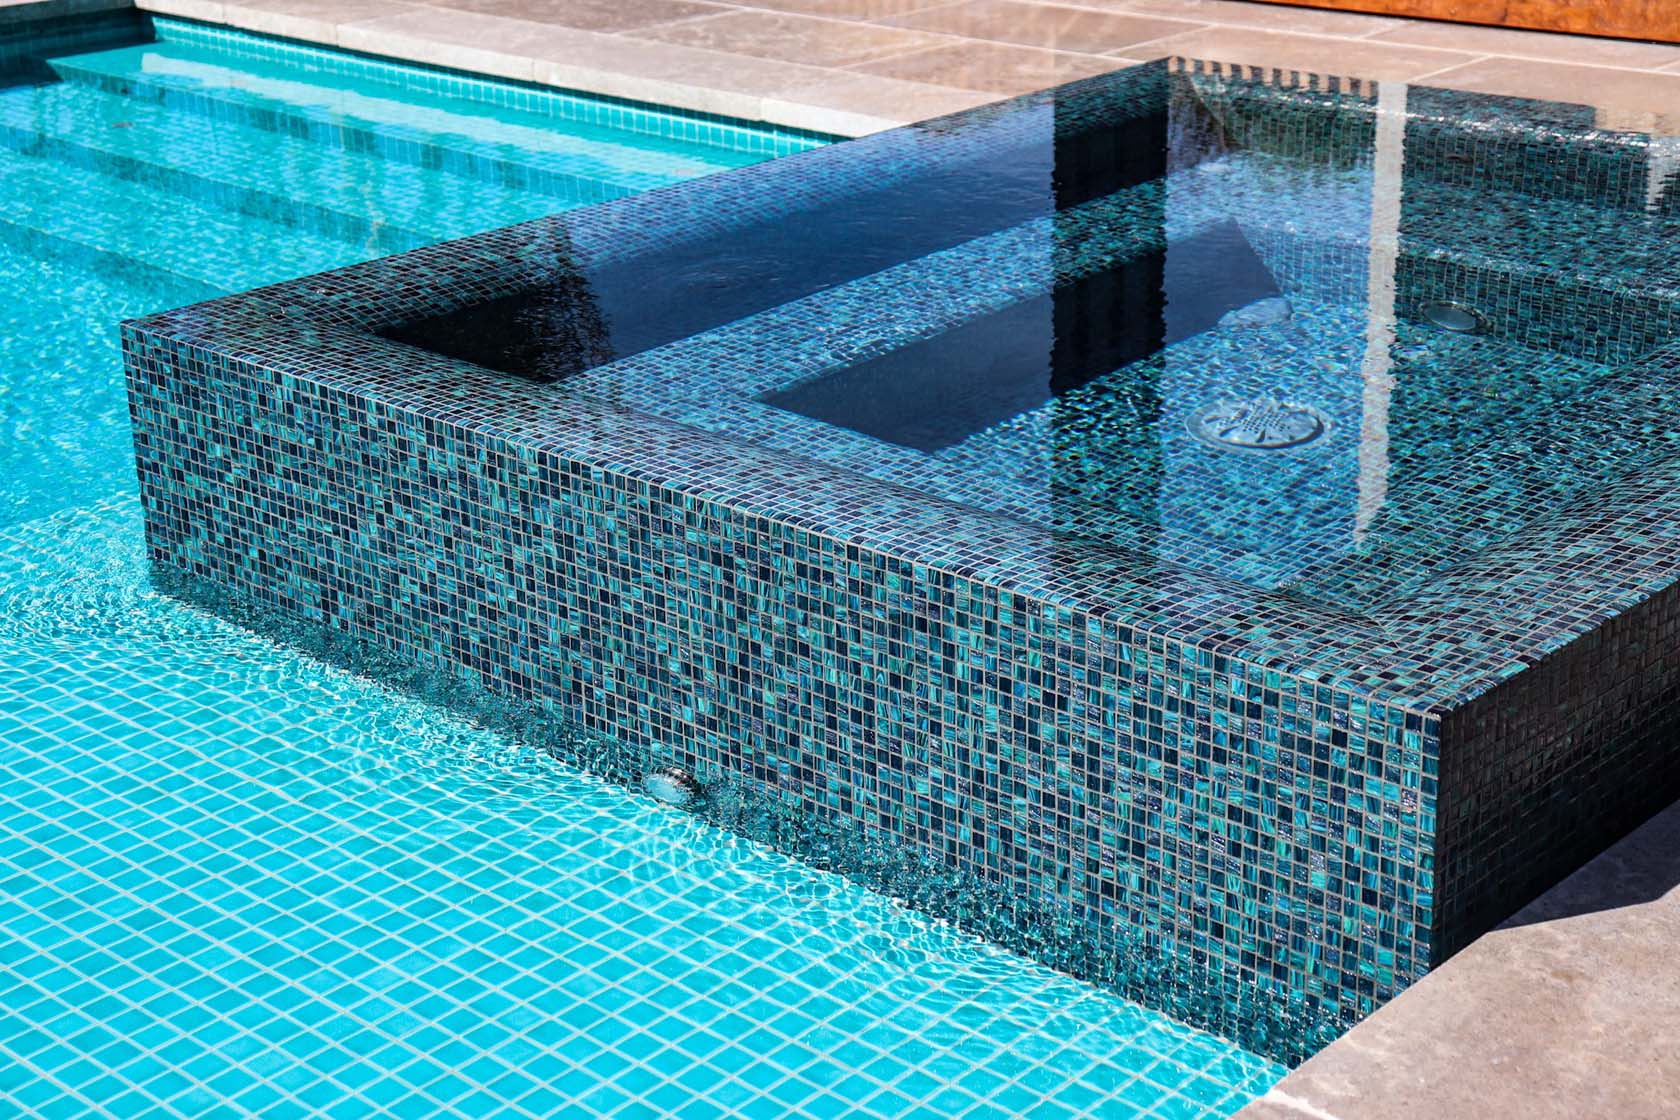 GC210 Peacock fully tiled spa and Neptune fully tiled pool